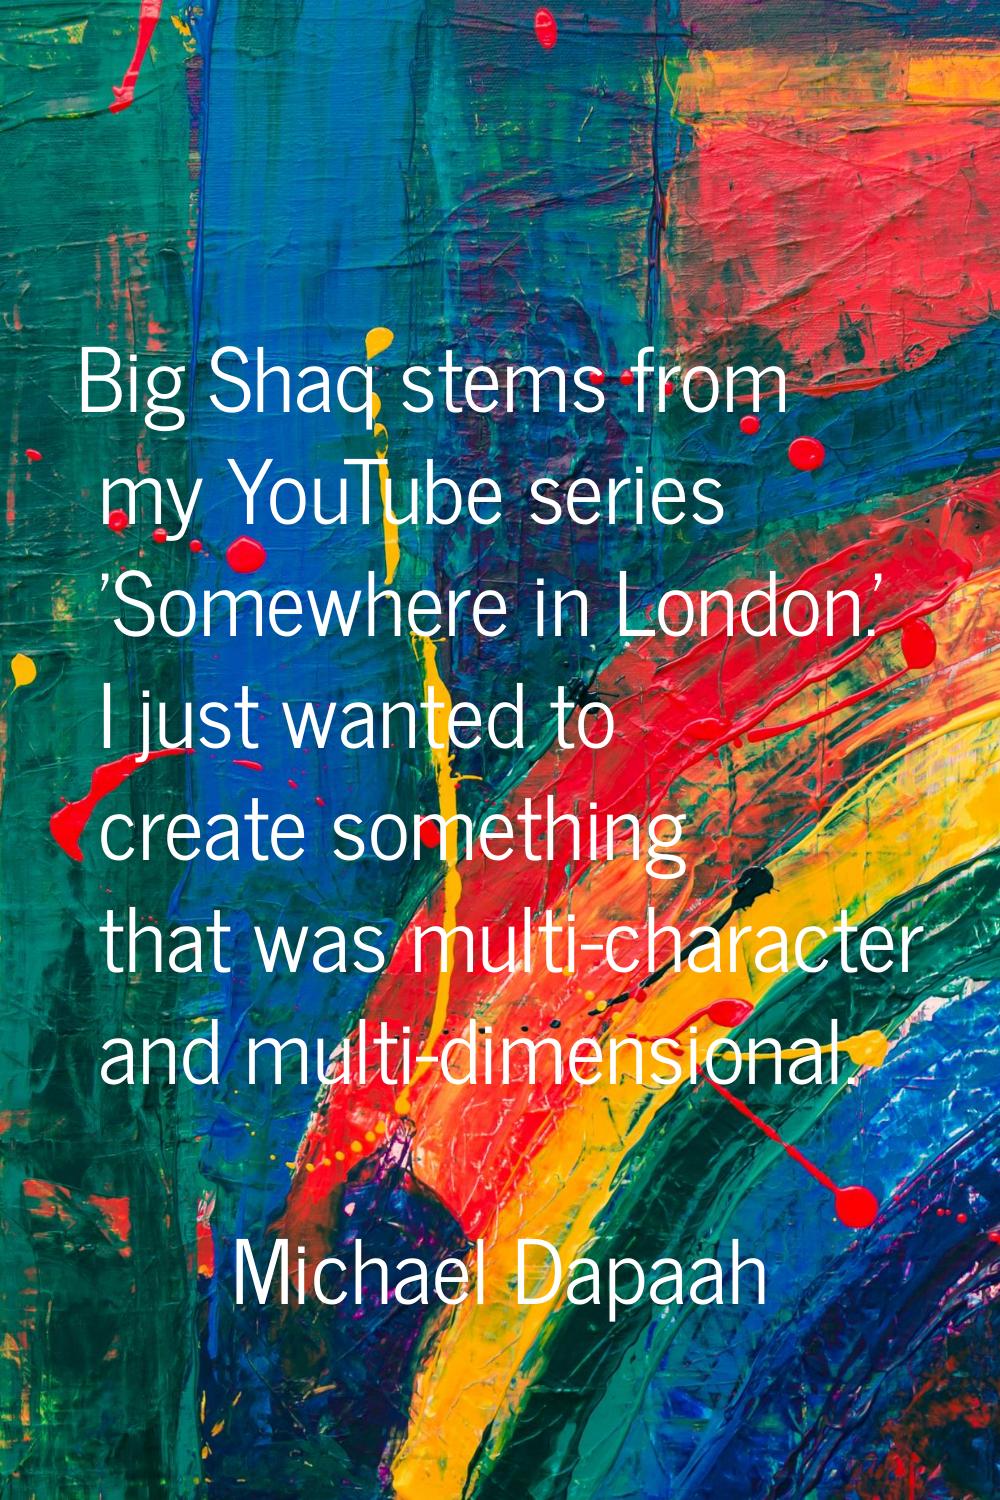 Big Shaq stems from my YouTube series 'Somewhere in London.' I just wanted to create something that